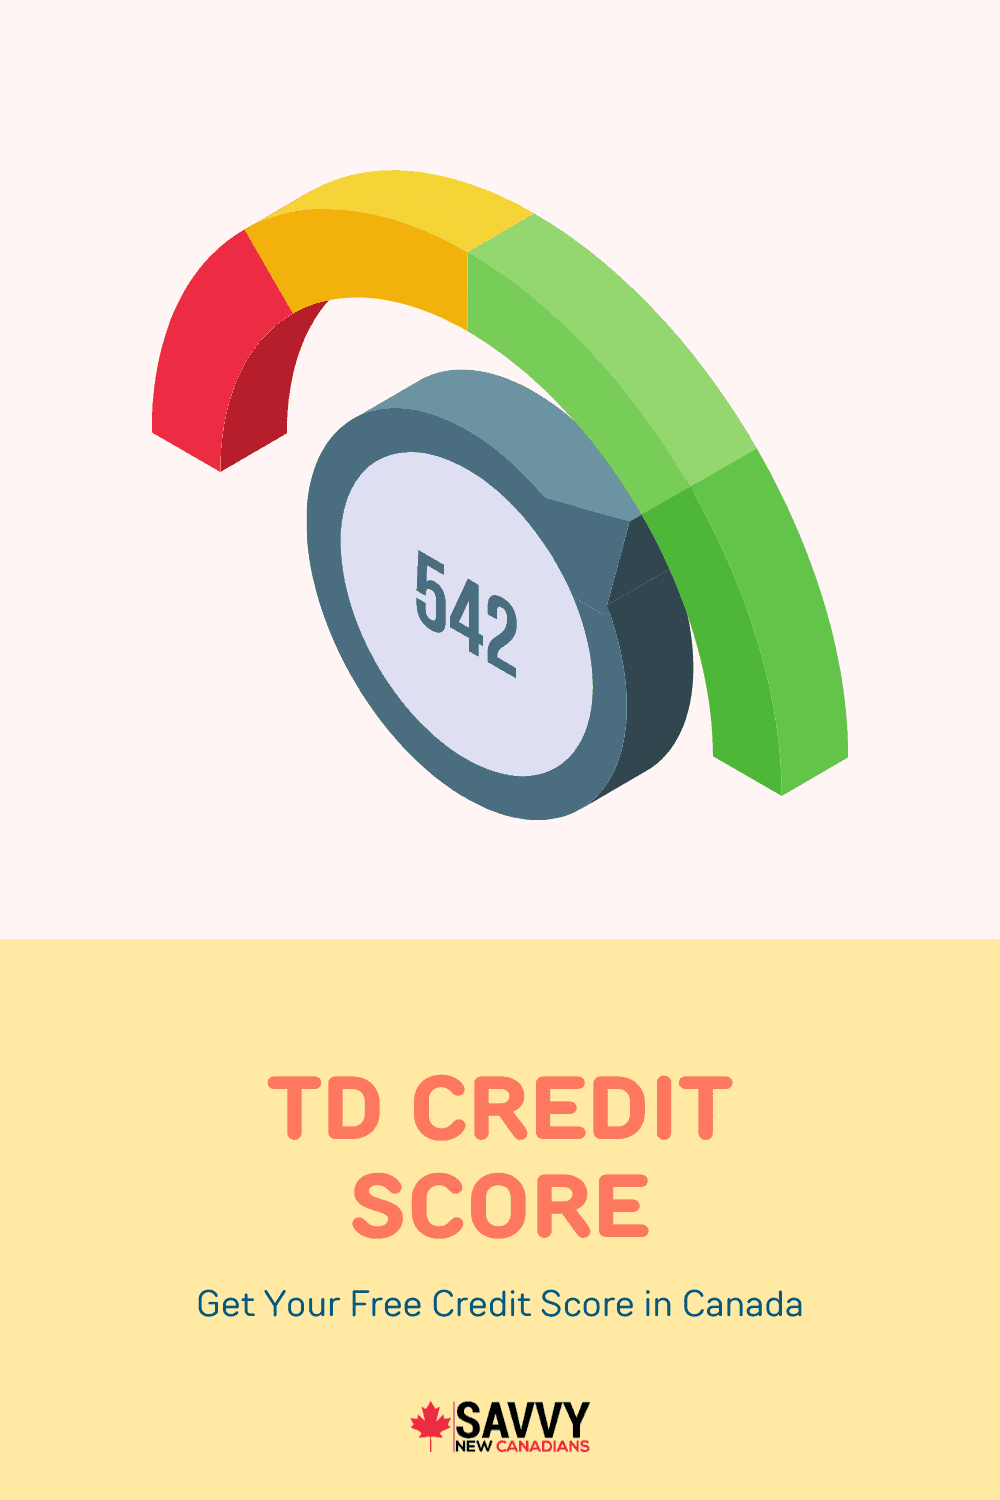 TD Credit Score: How To Check Your Free Credit Score in Canada